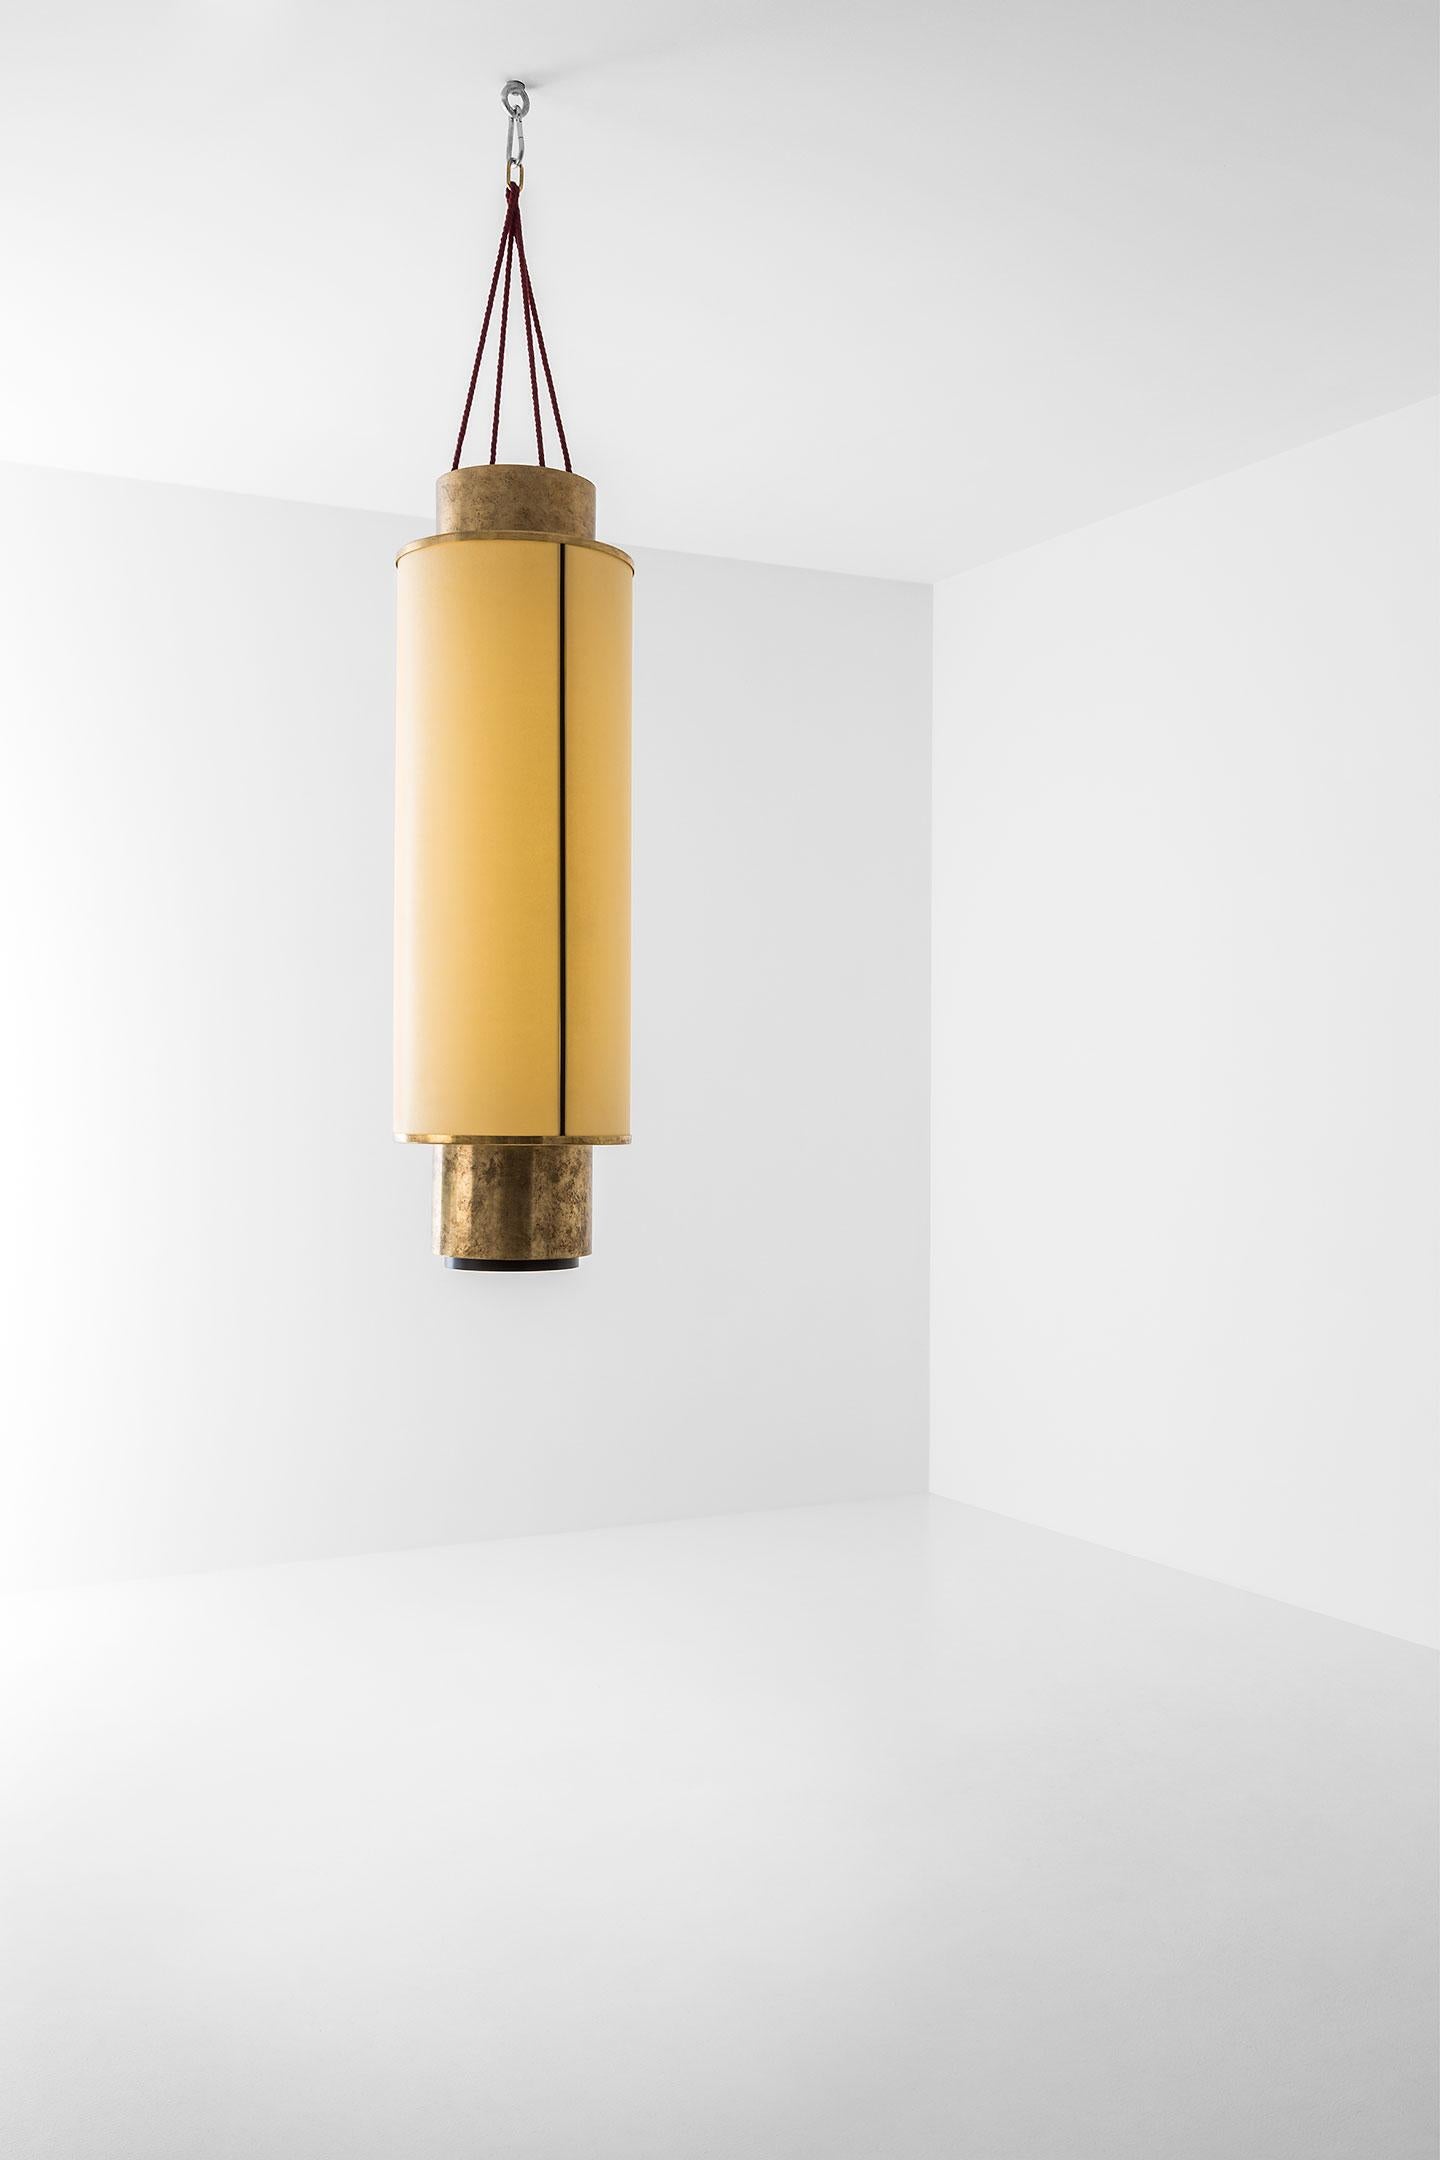 Dimmable ceiling lamp in matte black painted metal and polished oxidised brass.
Lampshade in parchment paper. Red cotton cord.
Dimoremilano collection by Dimorestudio
22% VAT WILL BE ADDED ON EUROPEAN ORDERS